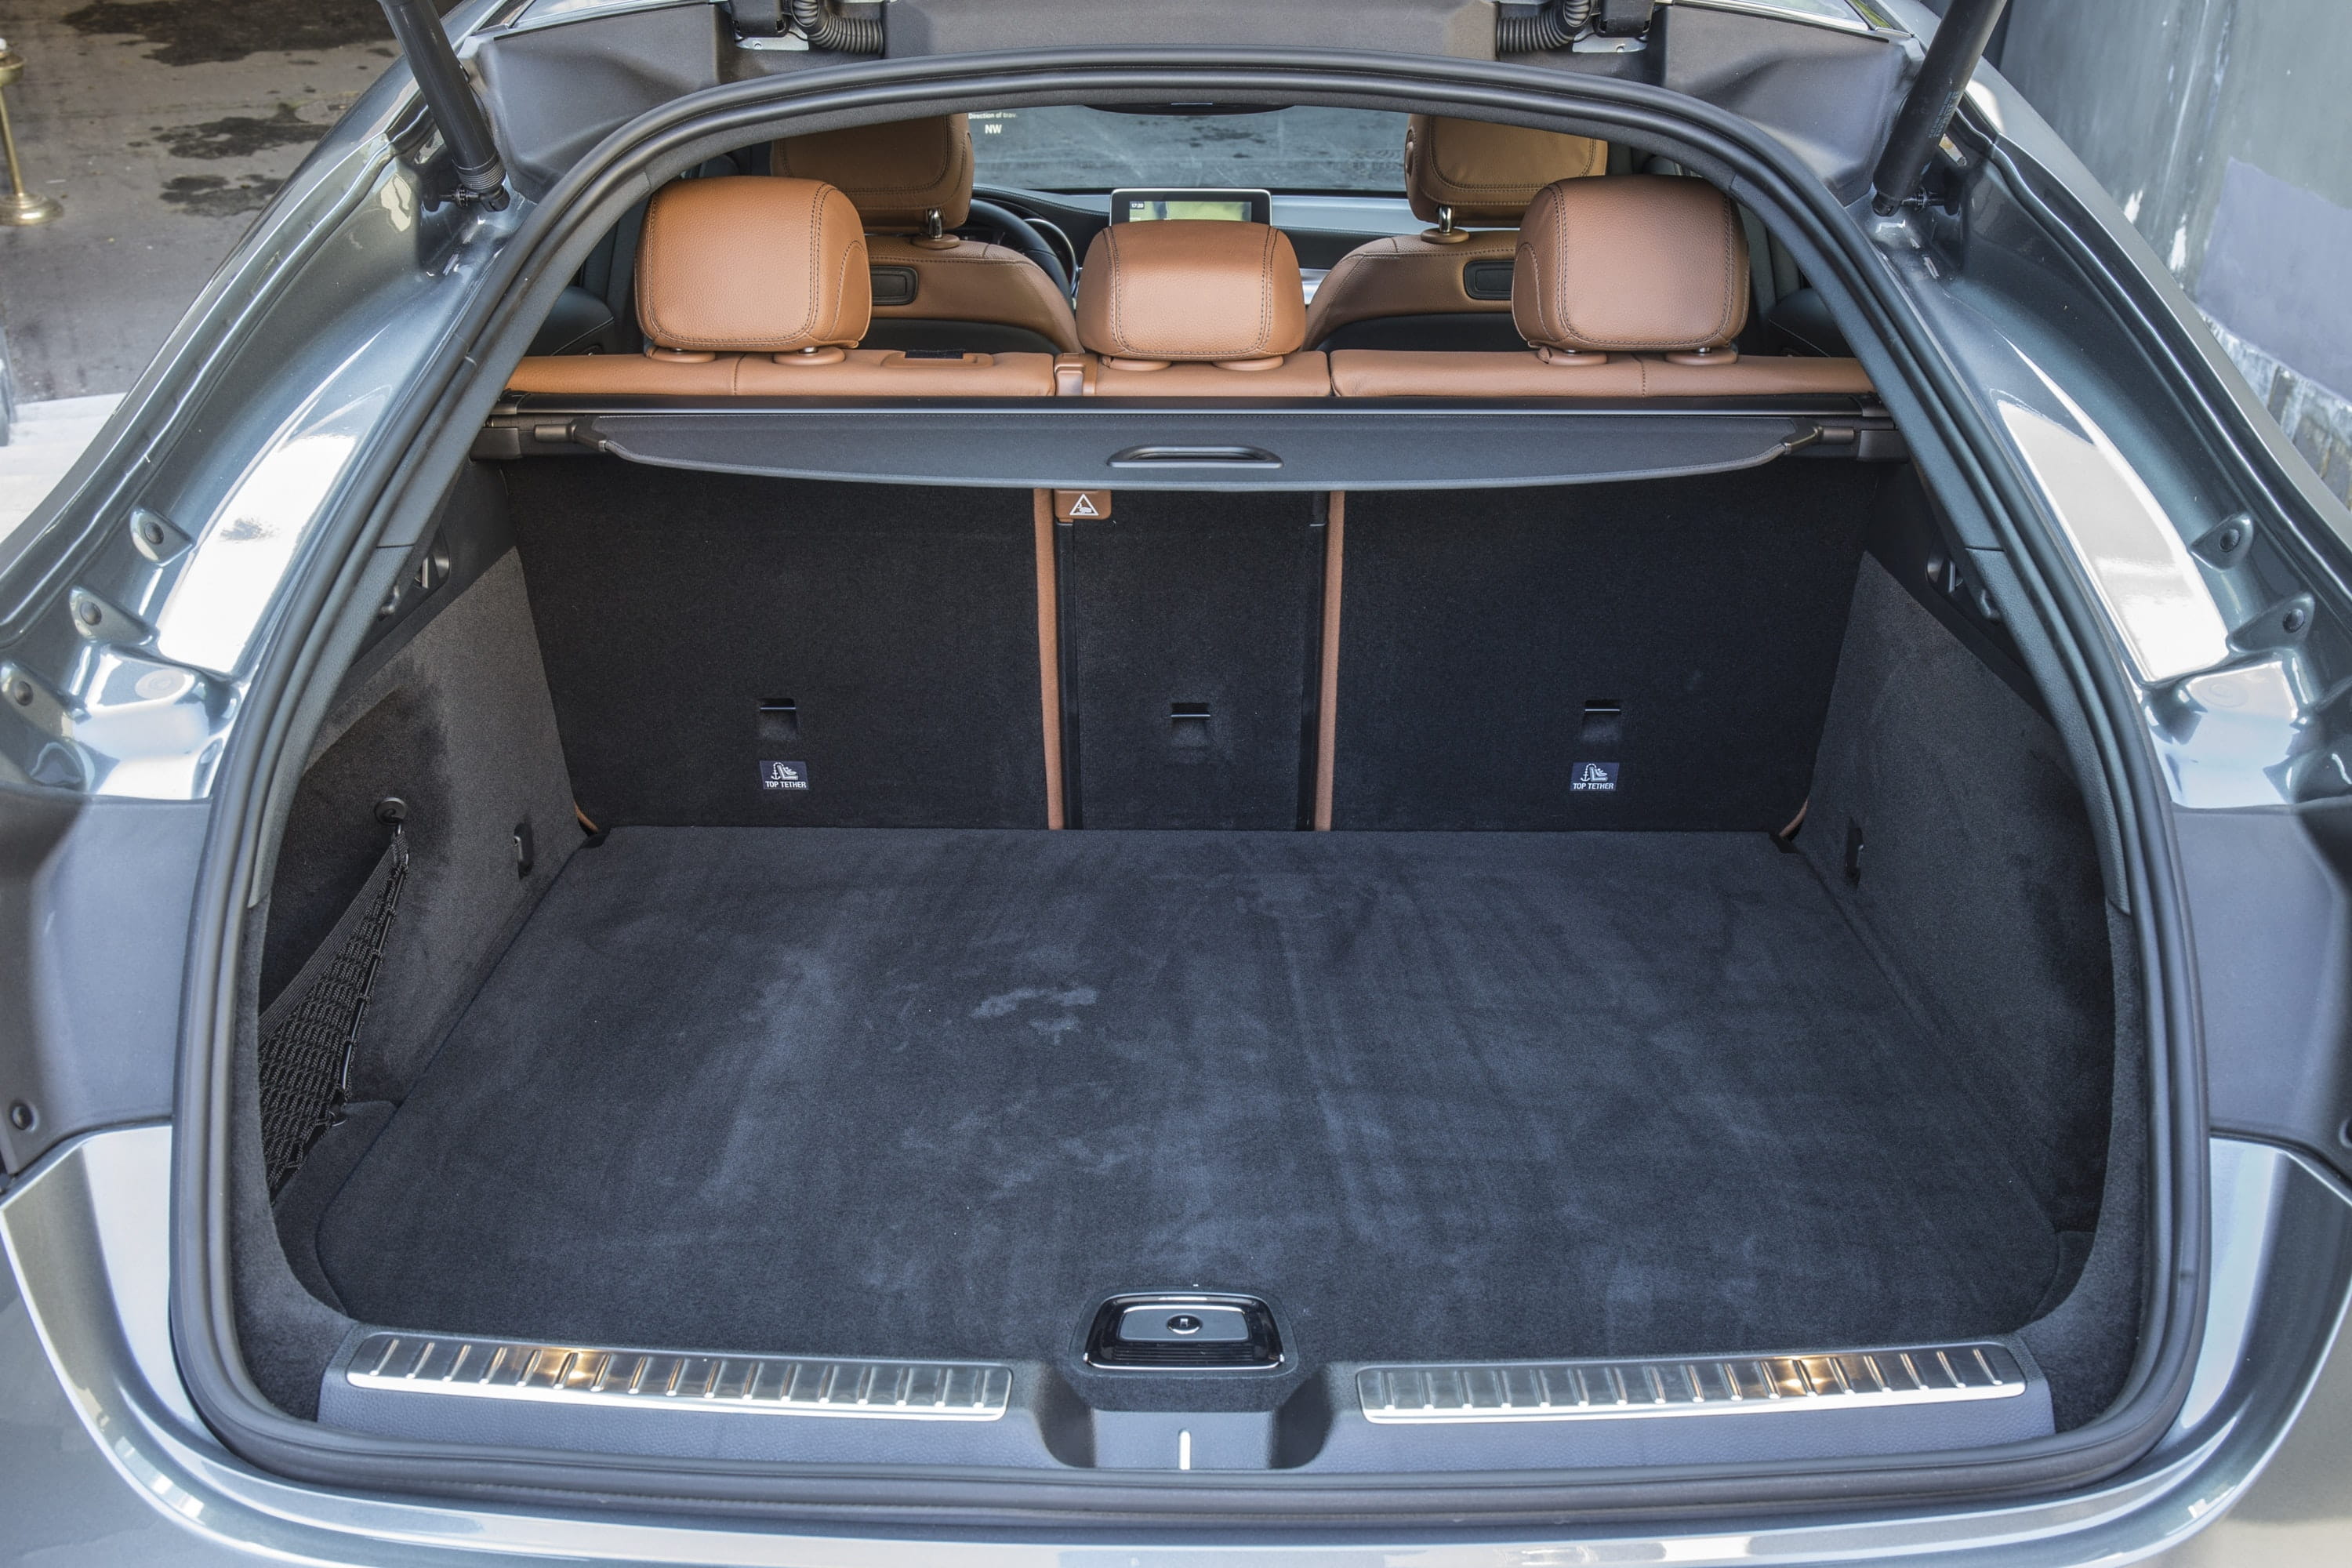 The GLC Coupe sacrifices some of the standard GLC's boot space, but not too much